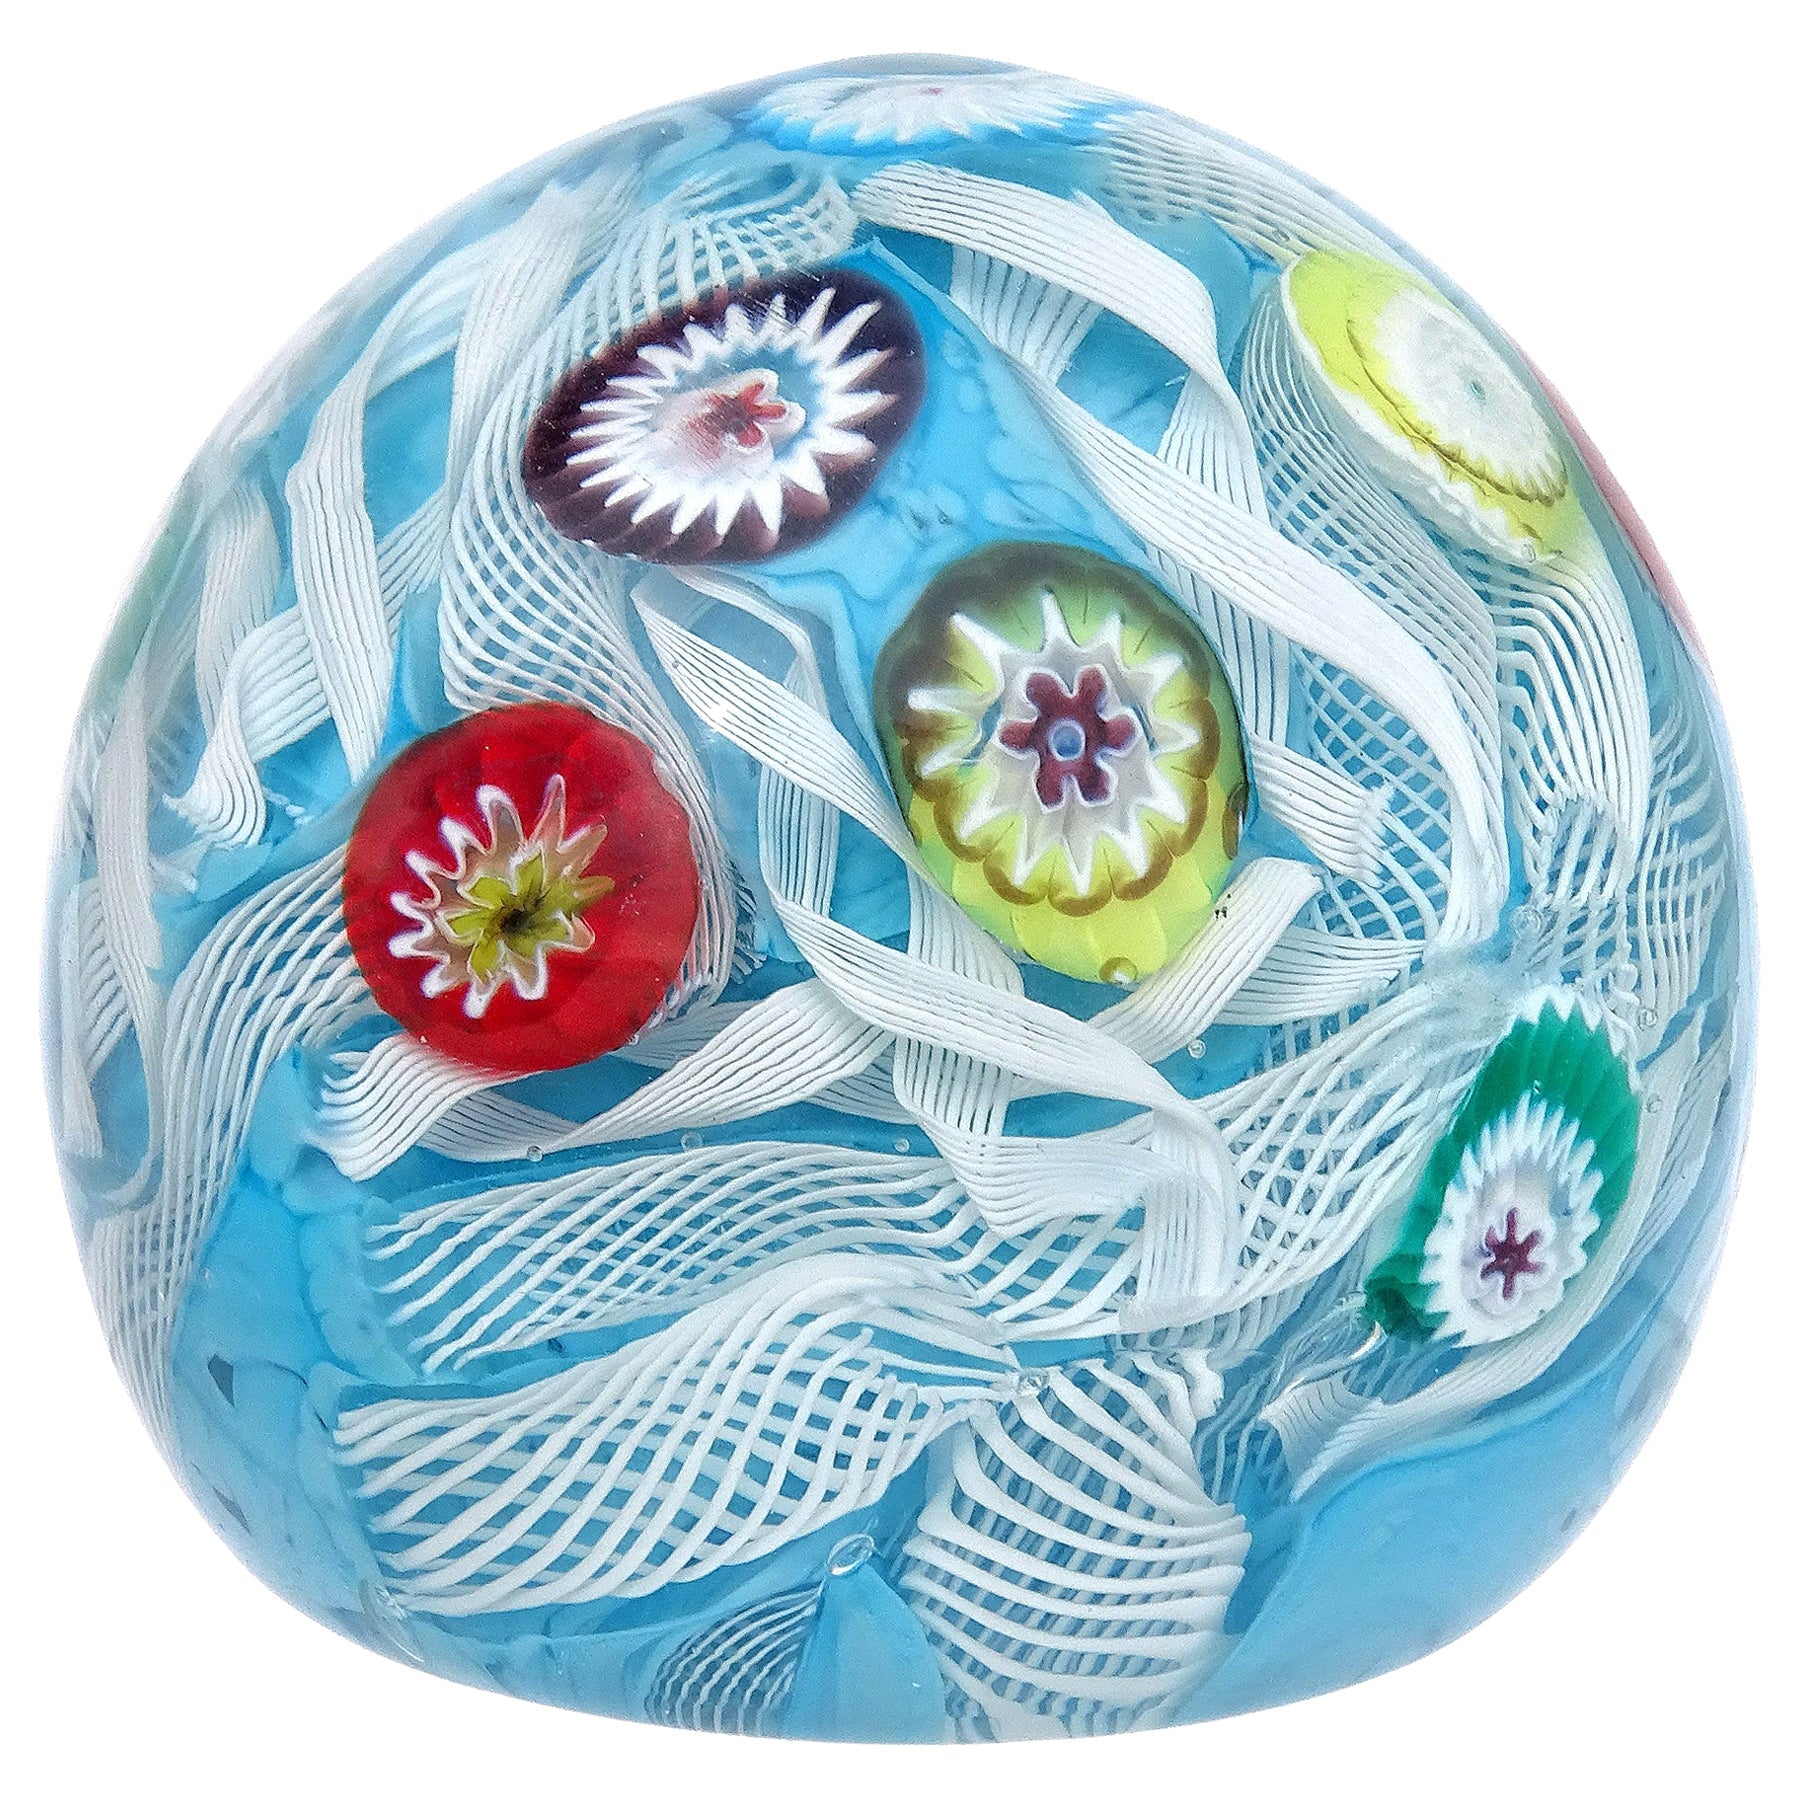 Murano Vintage Scramble Millefiori Flowers Italian Art Glass Large Paperweight For Sale At 1stdibs